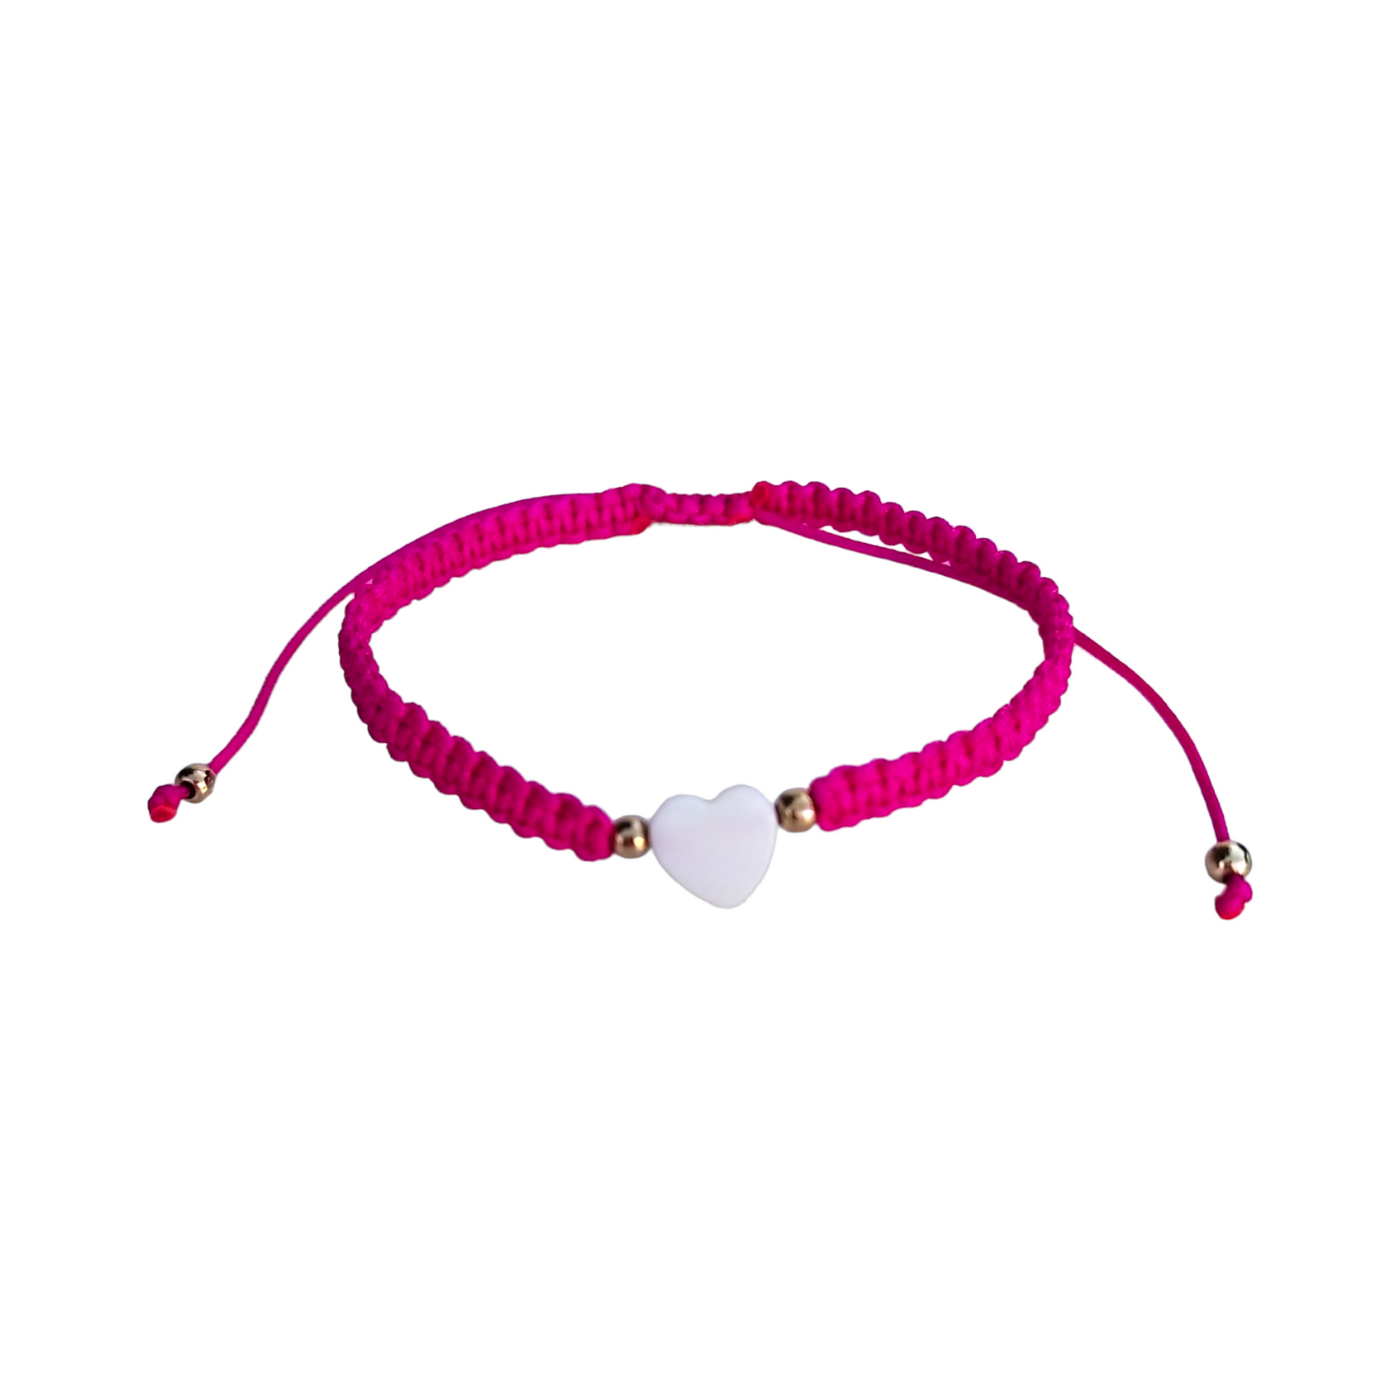 Adults - Mother of Pearl Citron Bracelets - Fuchsia